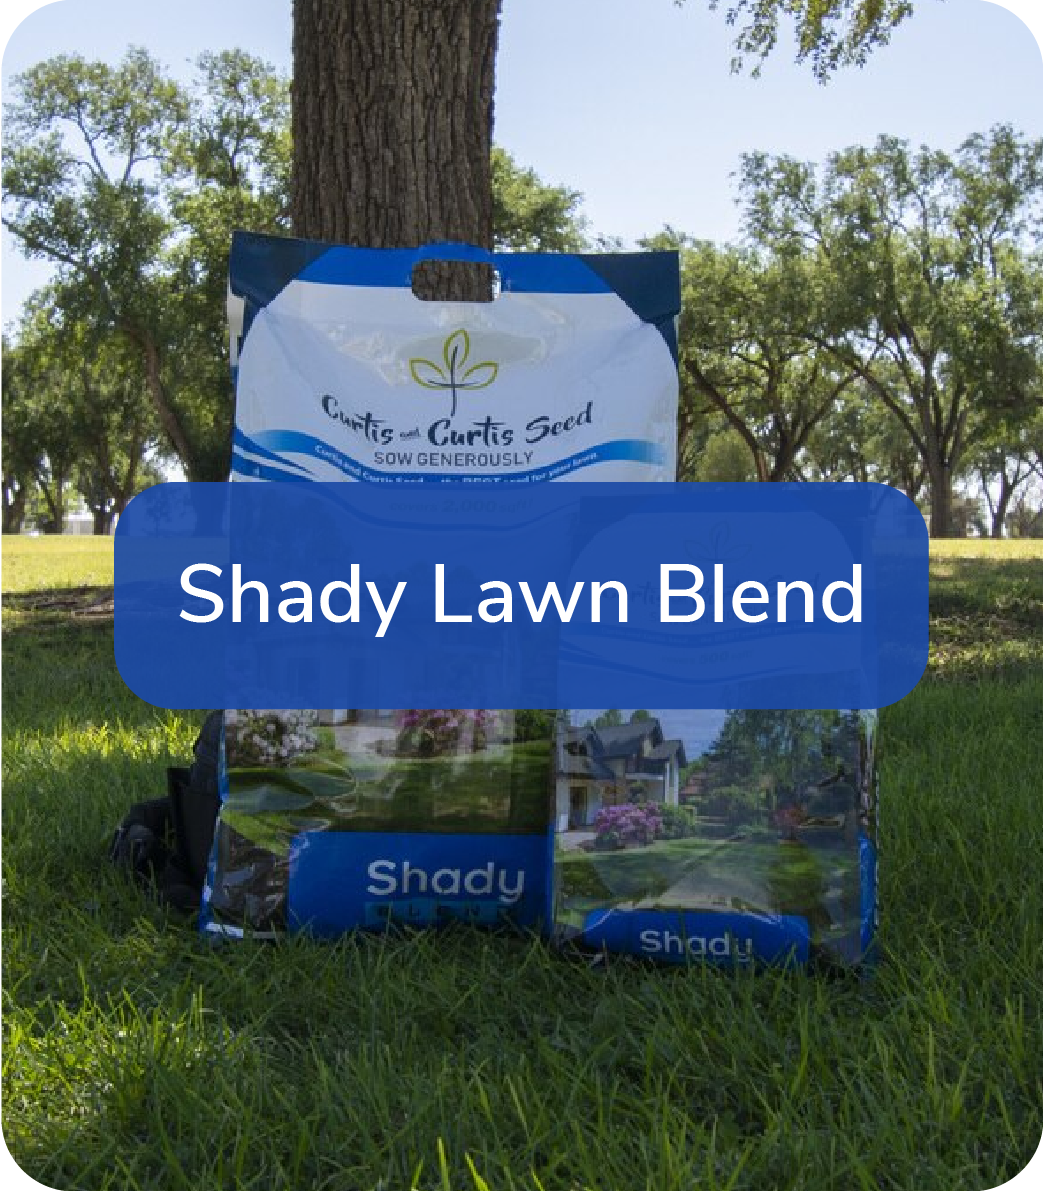 shady lawn blend bag of grass seed propped against a tree